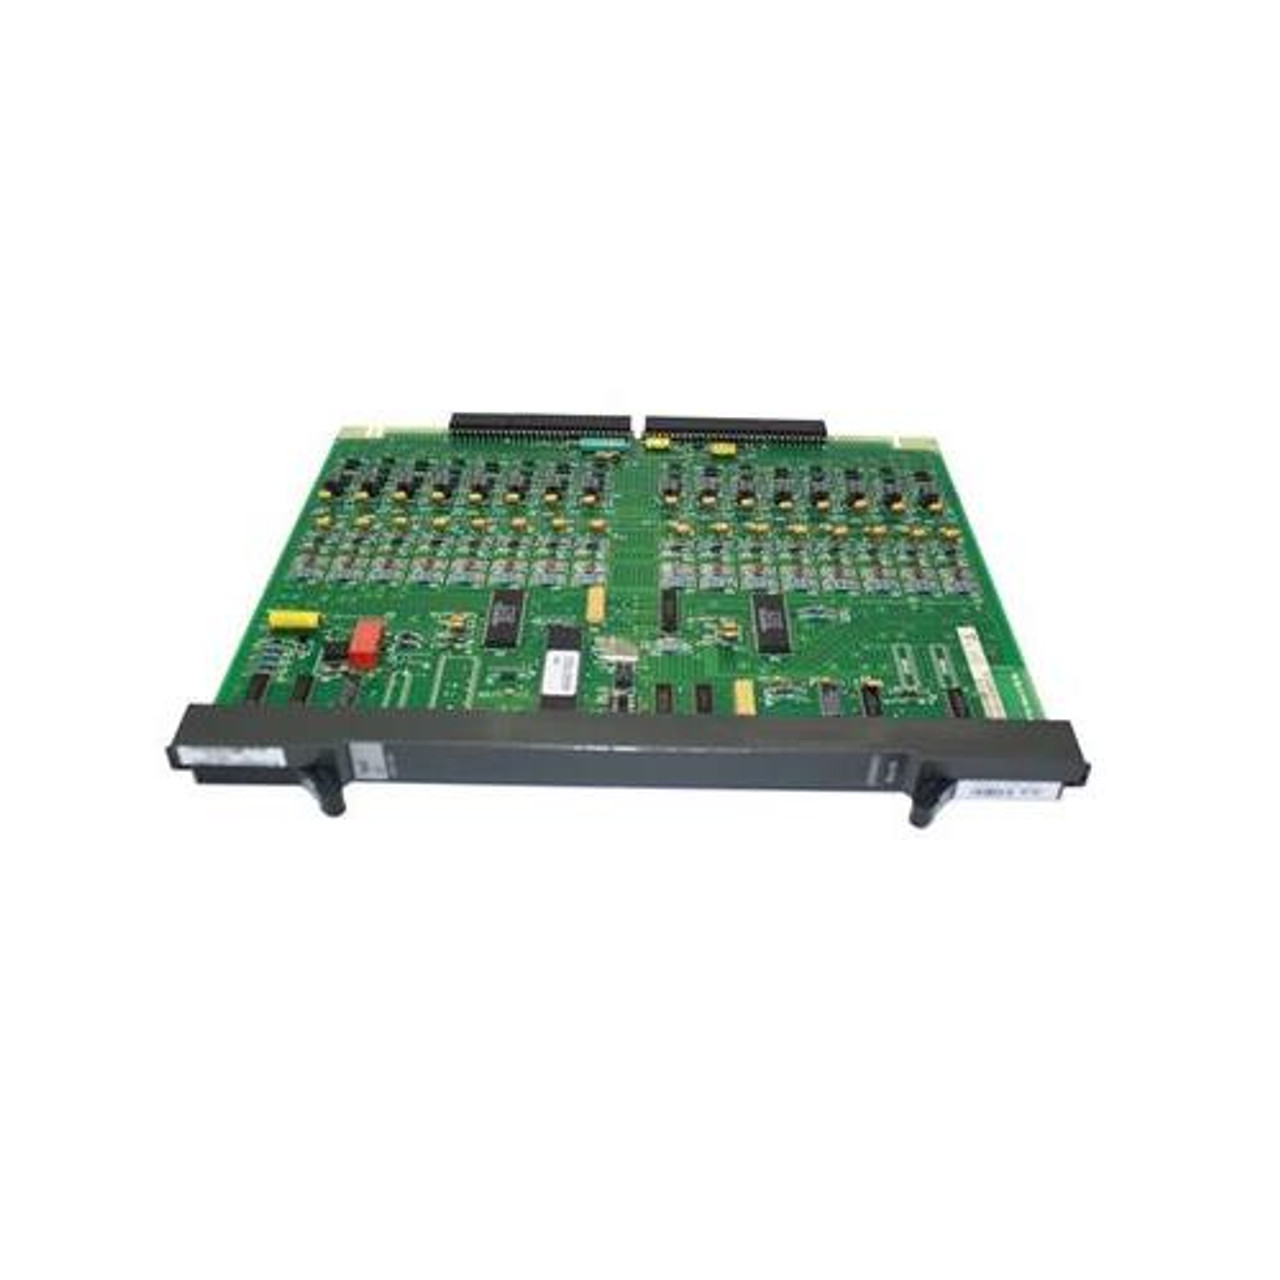 AG0011025 Nortel 16M FRE2-060E with Advanced Compression Co-processor spare For 256 Context (Refurbished)